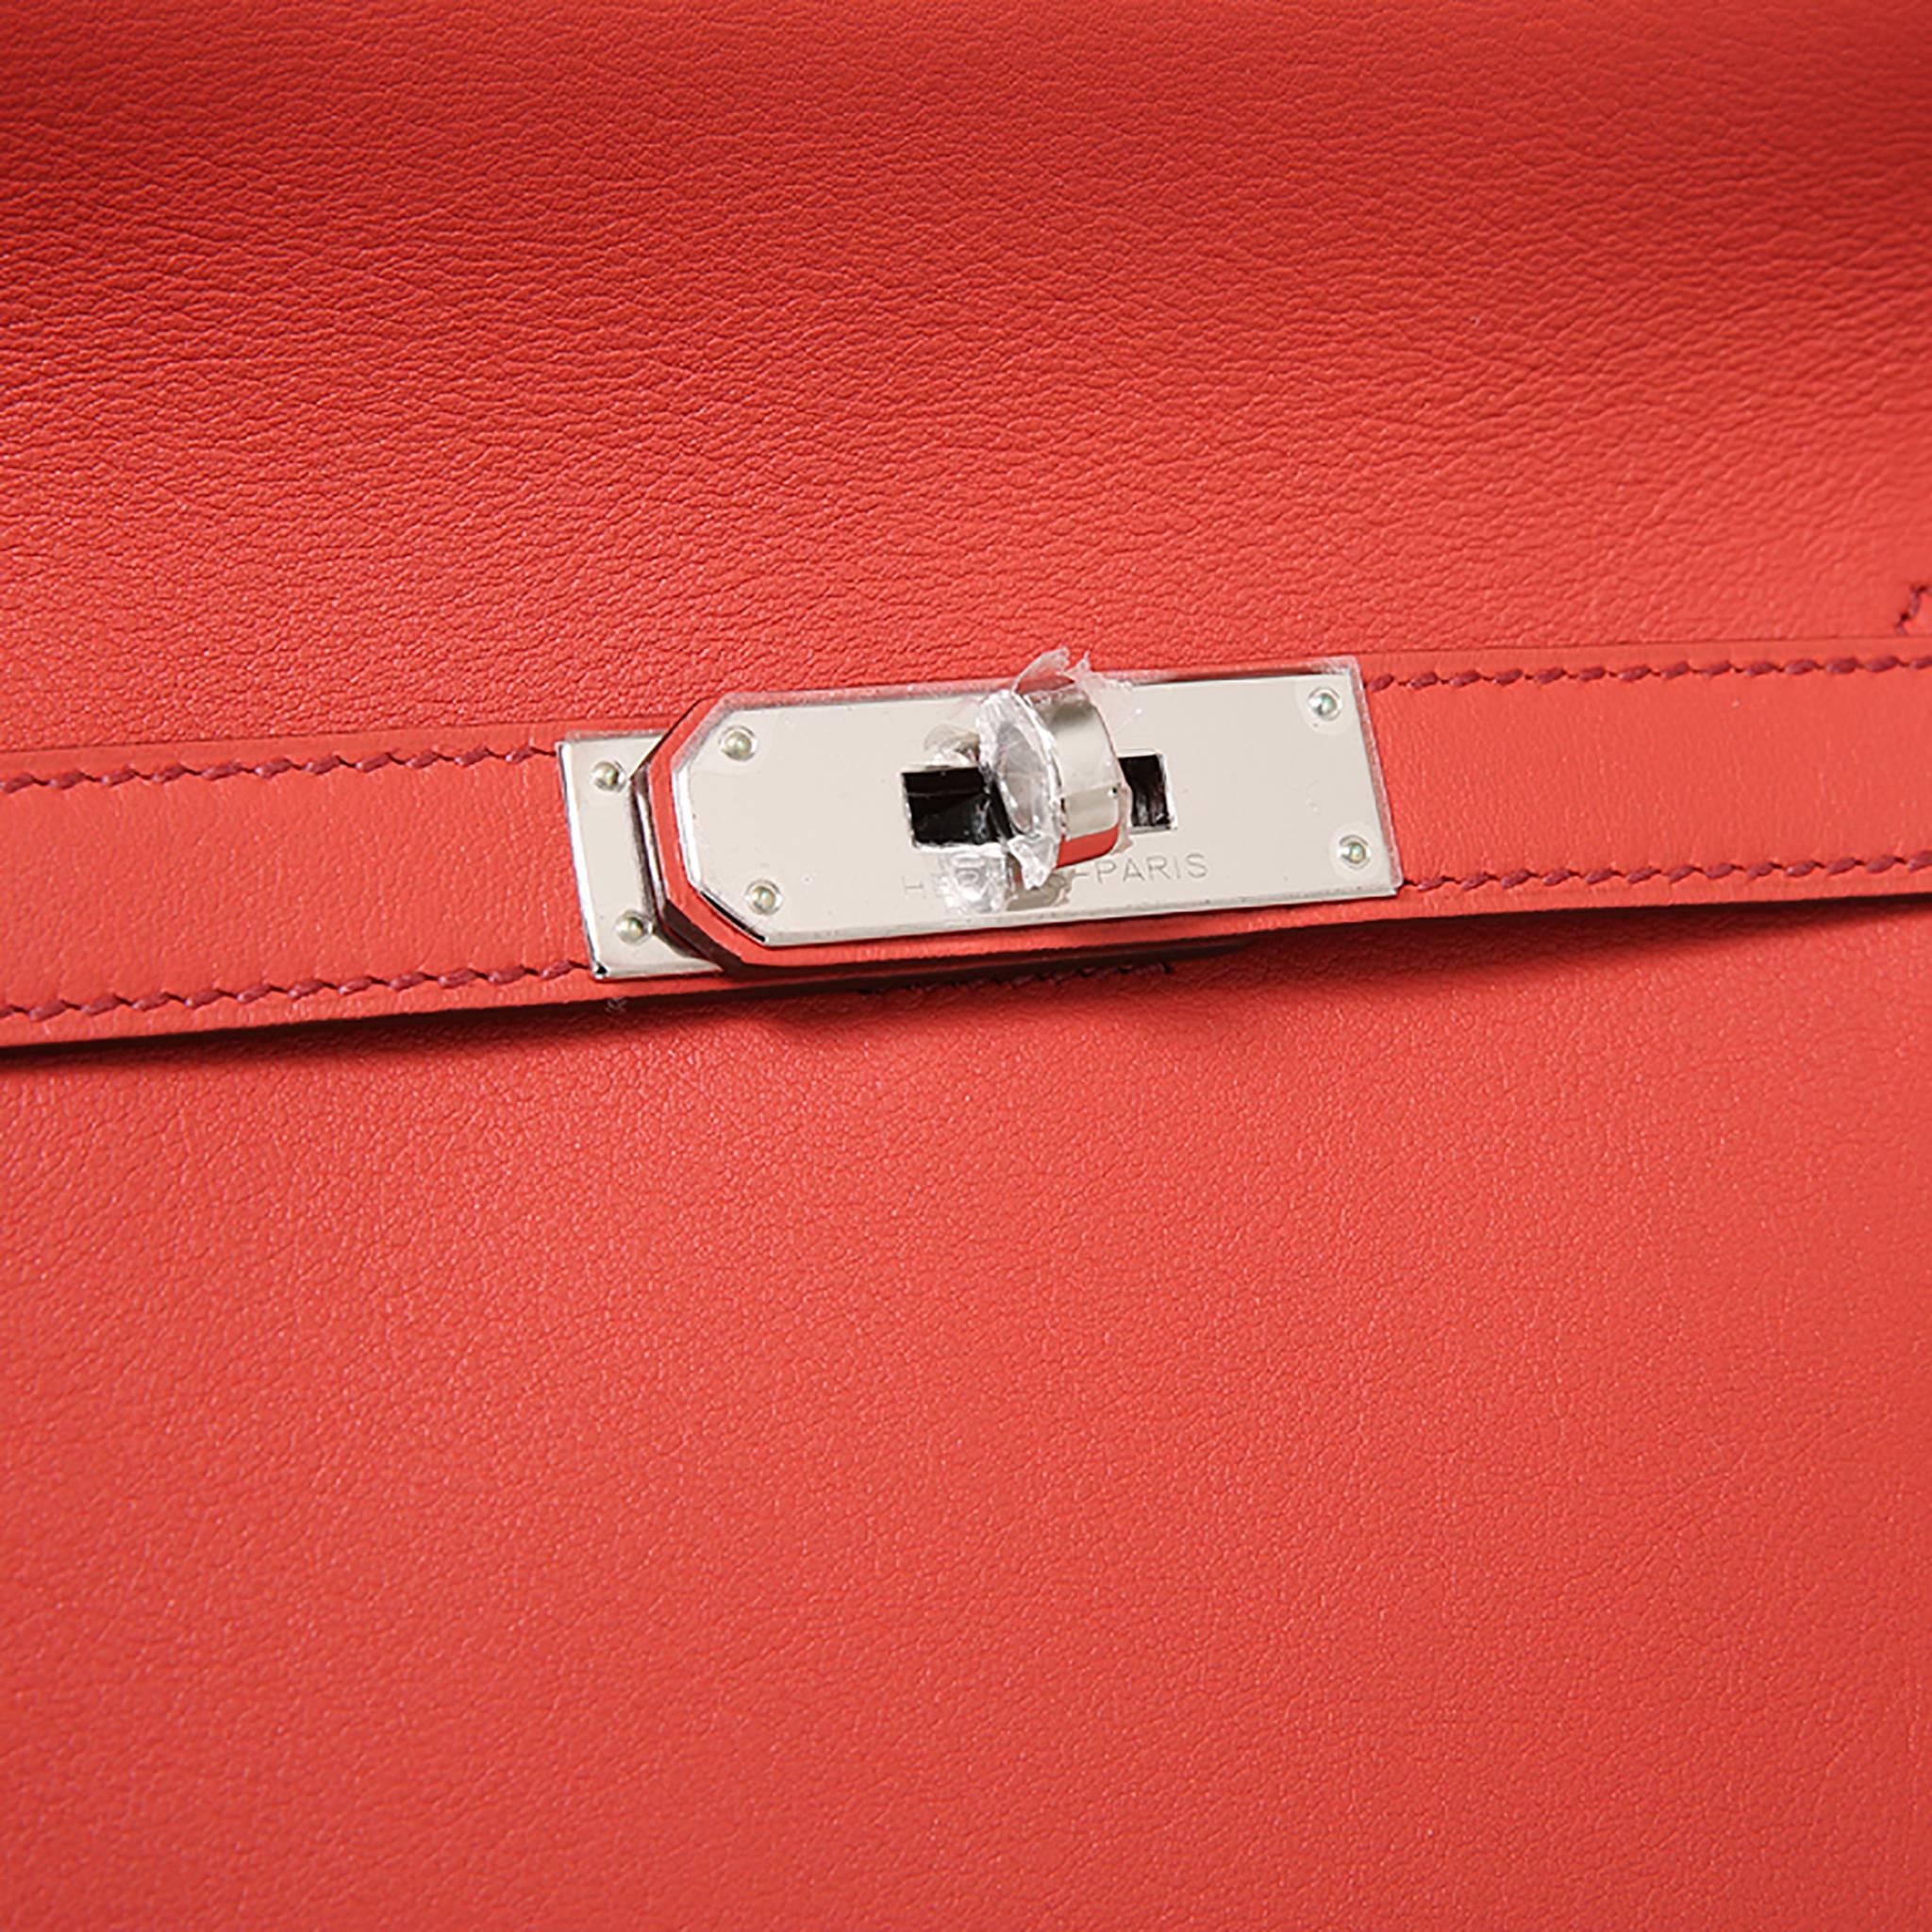 Hermes Jypsiere 28 T. Clemence Leather Red / Brick Red Color PHW 1